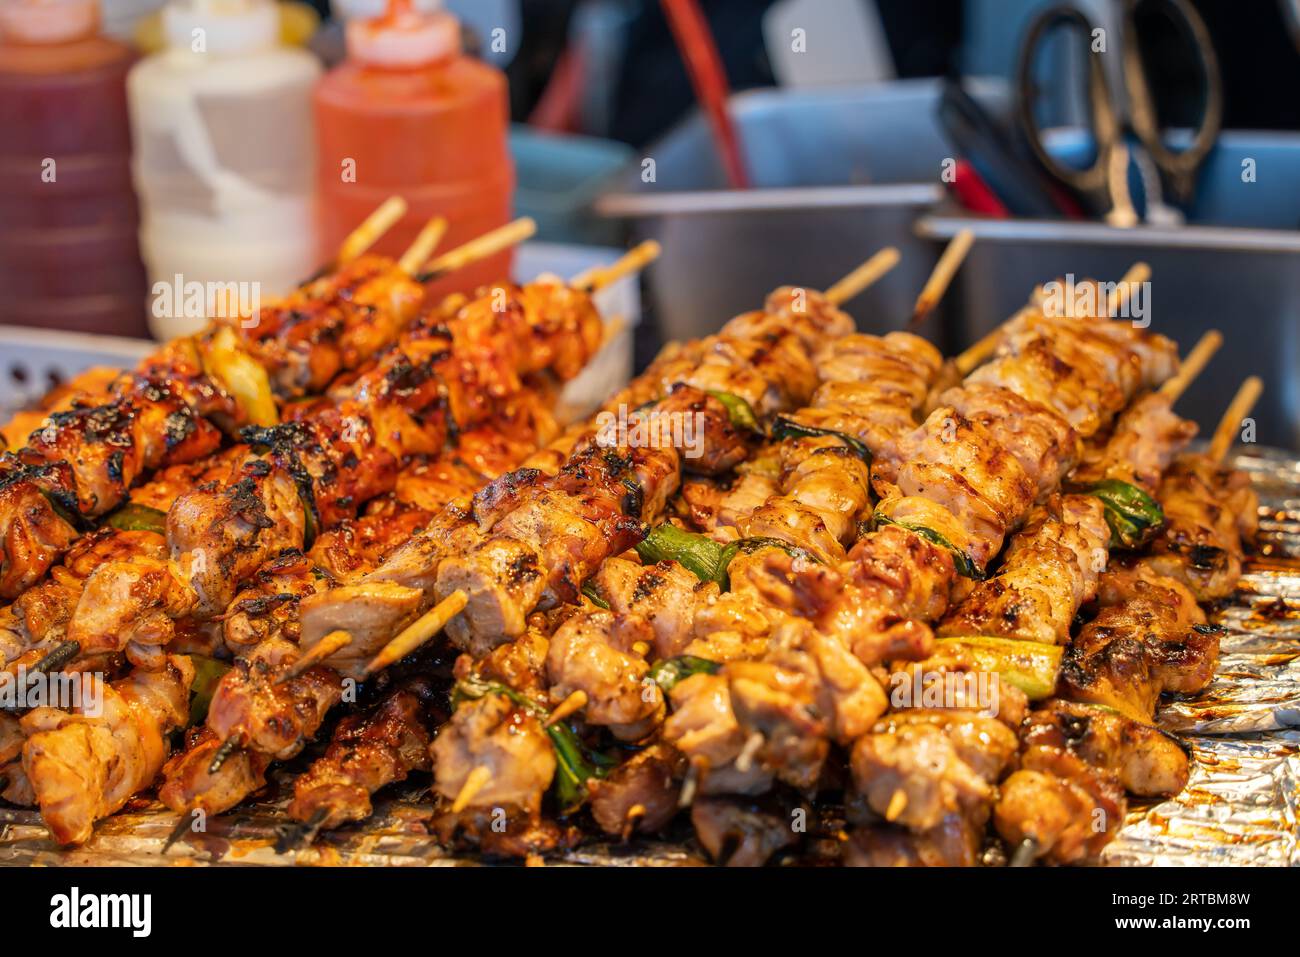 Grilling barbecue meat skewer kebab at traditional night market stall, delicious street food in South Korea. Stock Photo